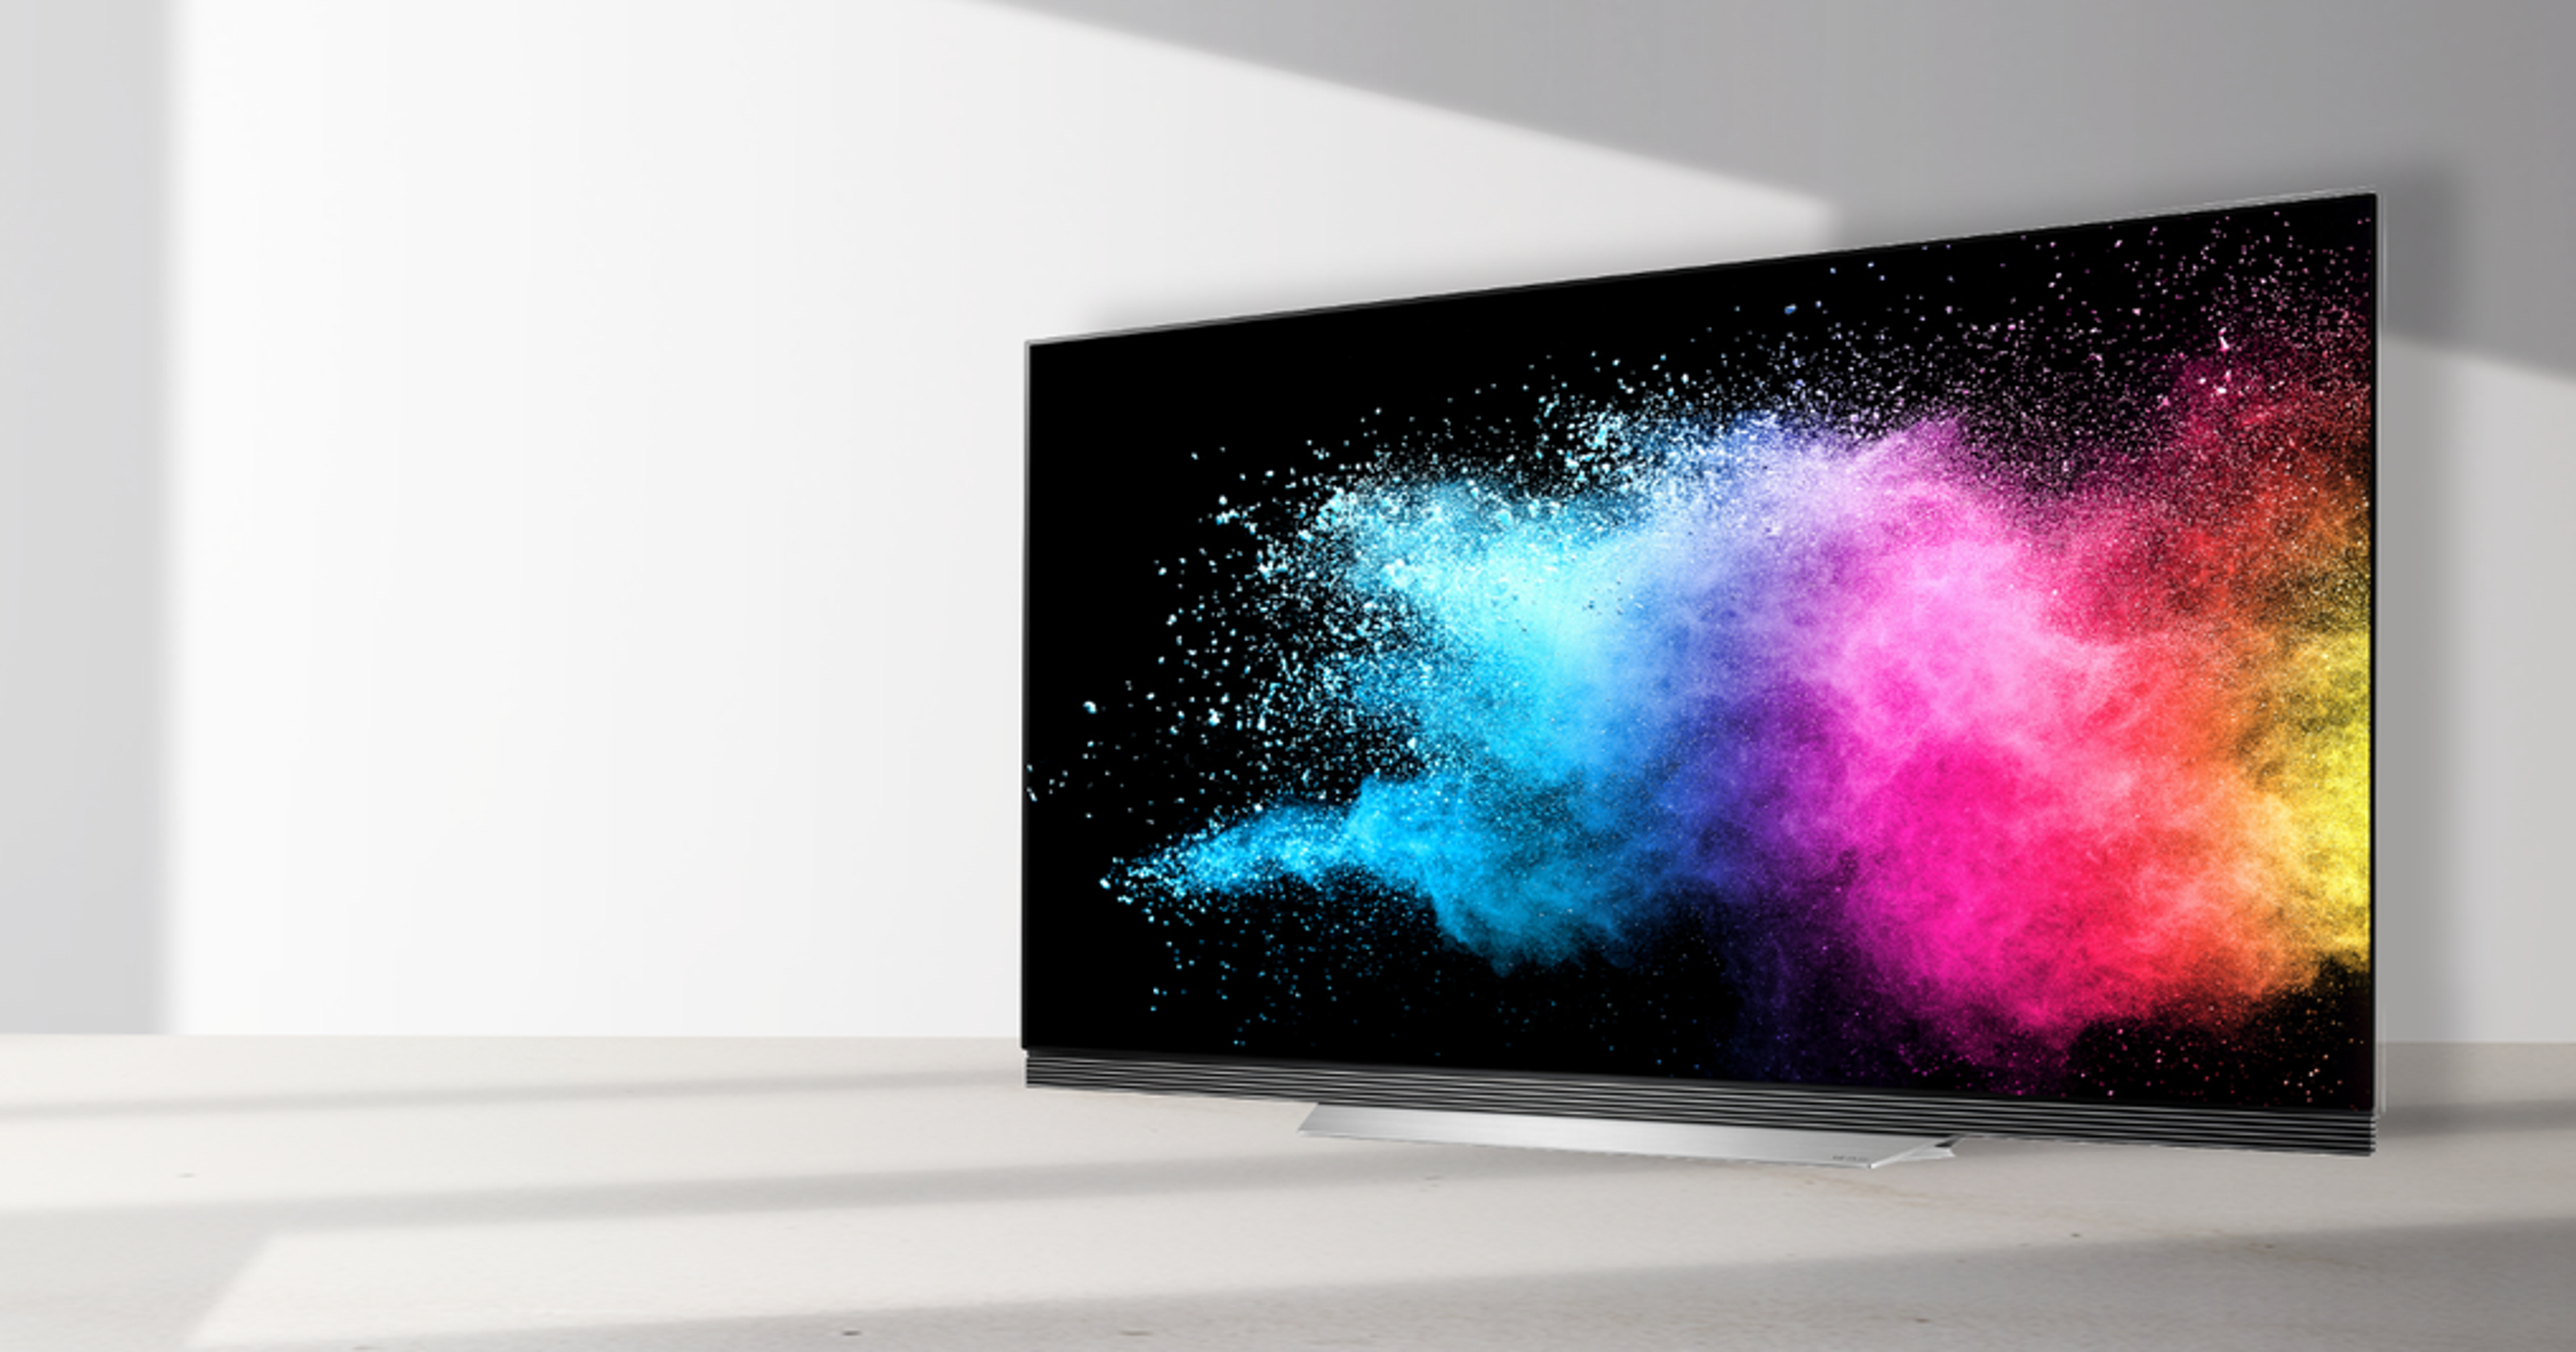 This luxury OLED TV is back down to its lowest price—for now